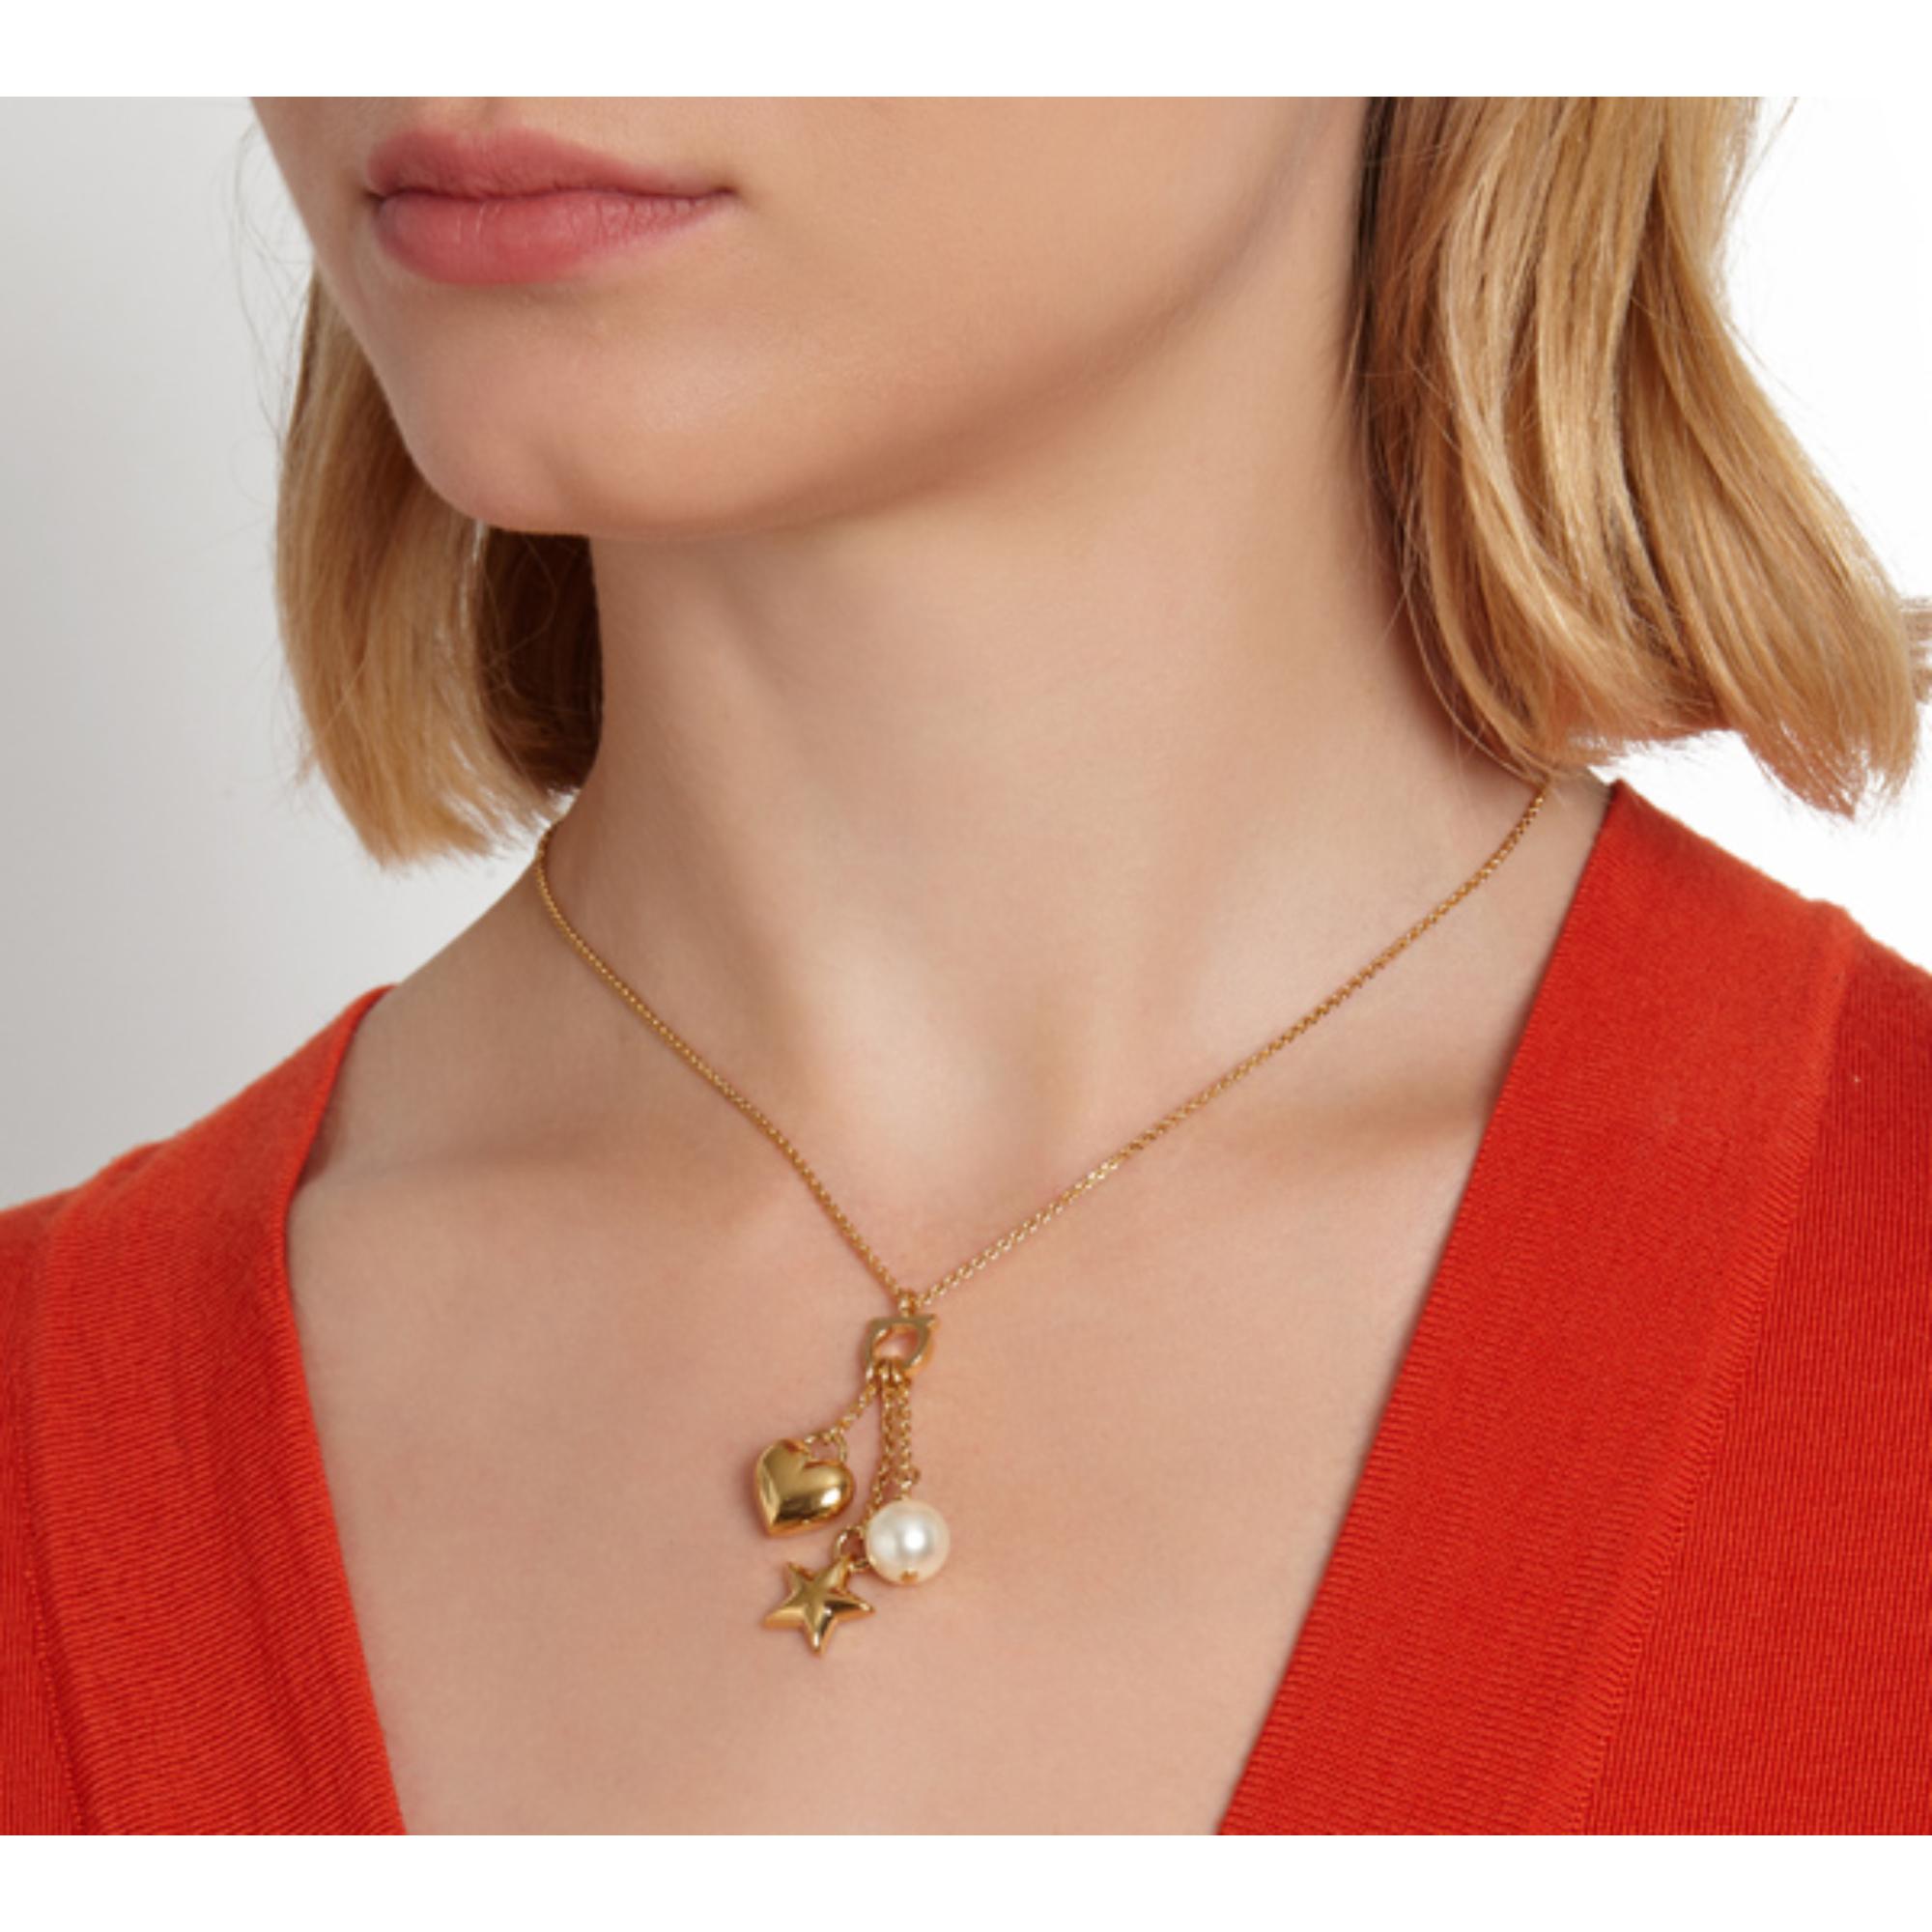 Gancini Charm Necklace - Gold